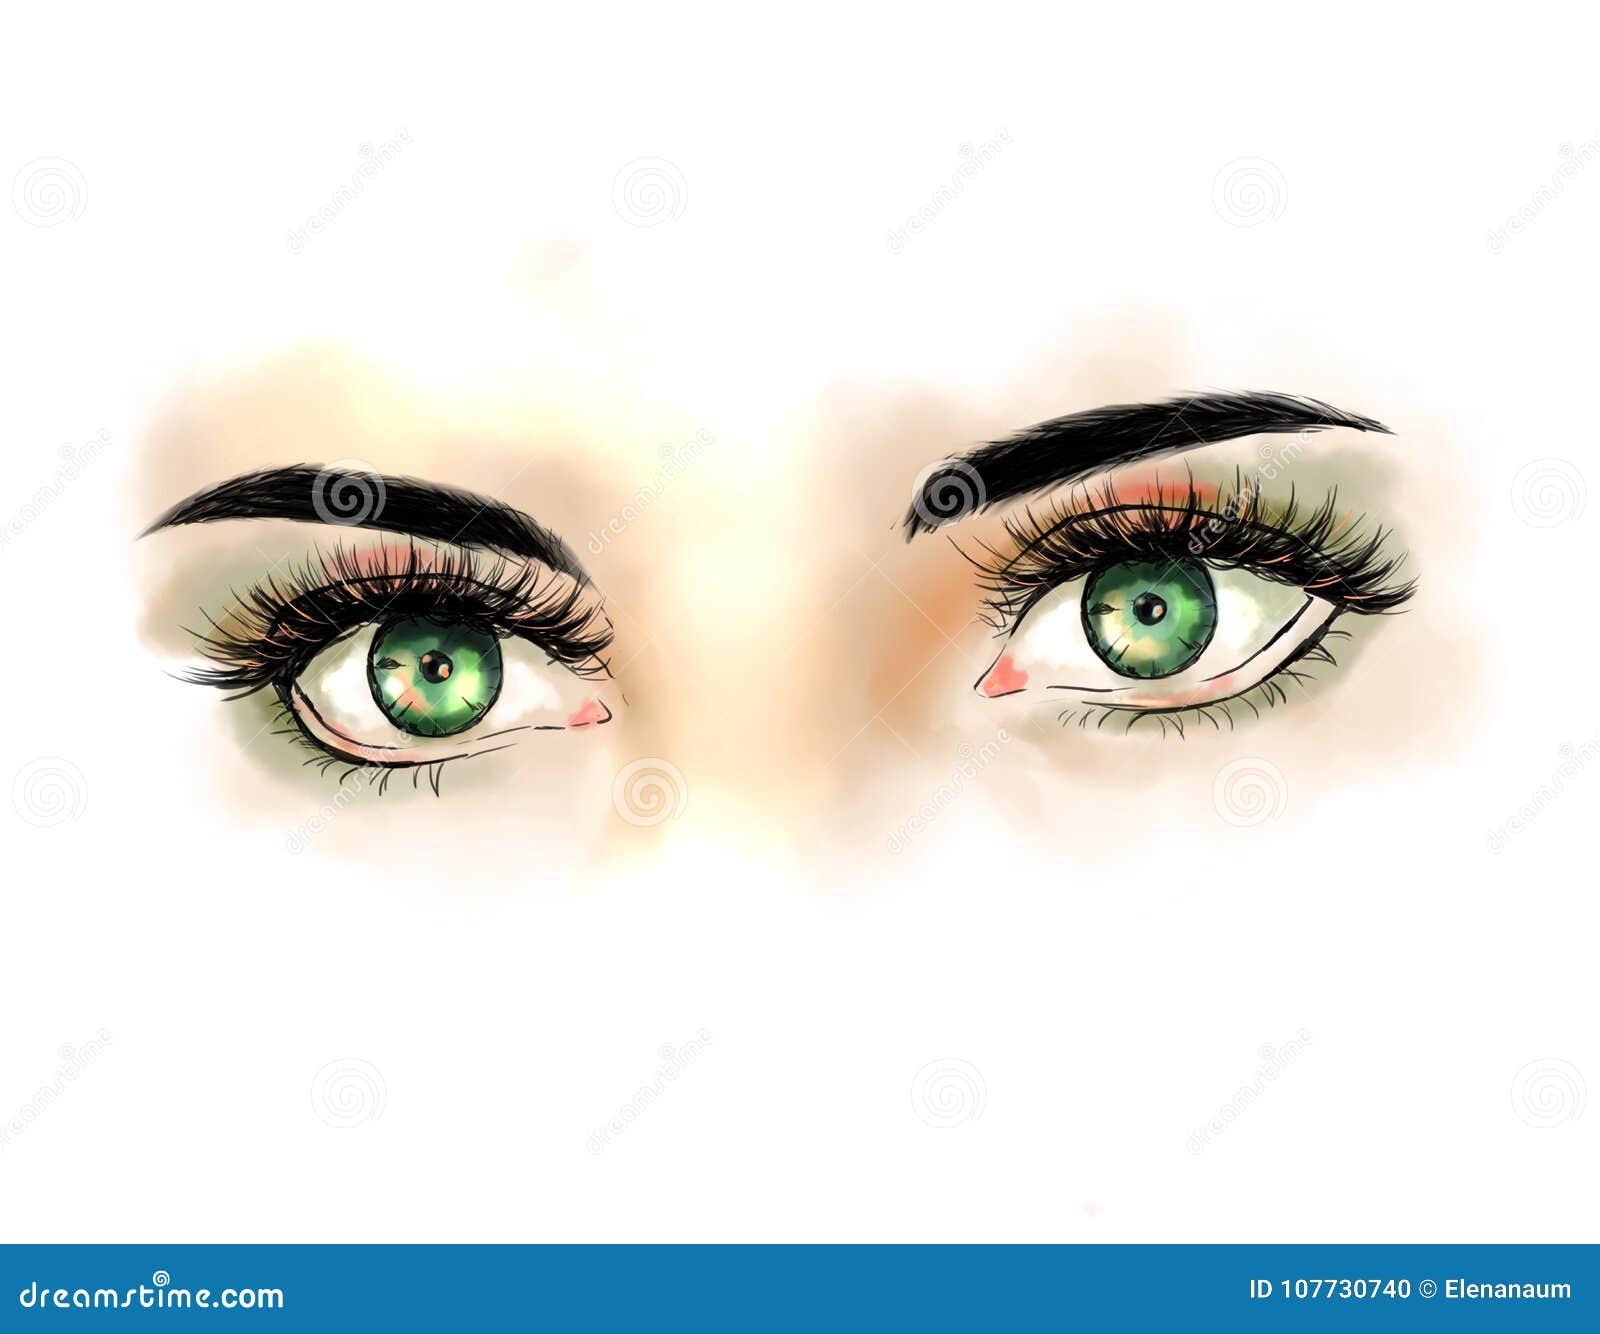 Beautiful Eye picture, by ashwinisadamate for: eyes dd drawing contest -  Pxleyes.com